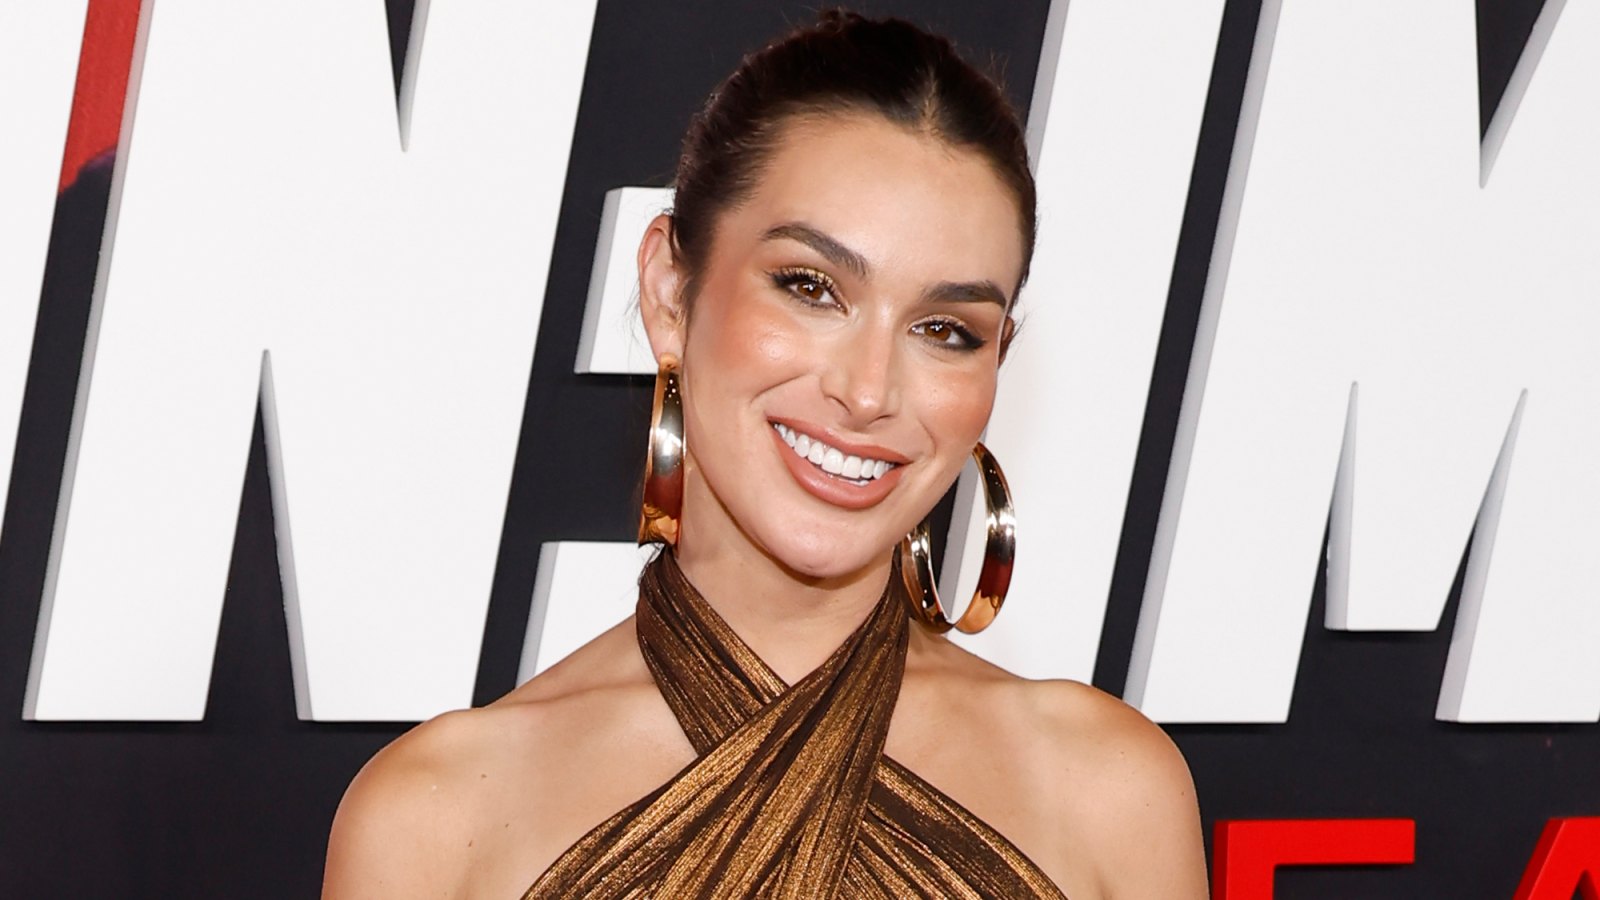 Ashley Iaconetti Shows Son Dawson’s ‘Self-Tanning Mishap’ After Getting Into Her Makeup: ‘A Little Streaky’